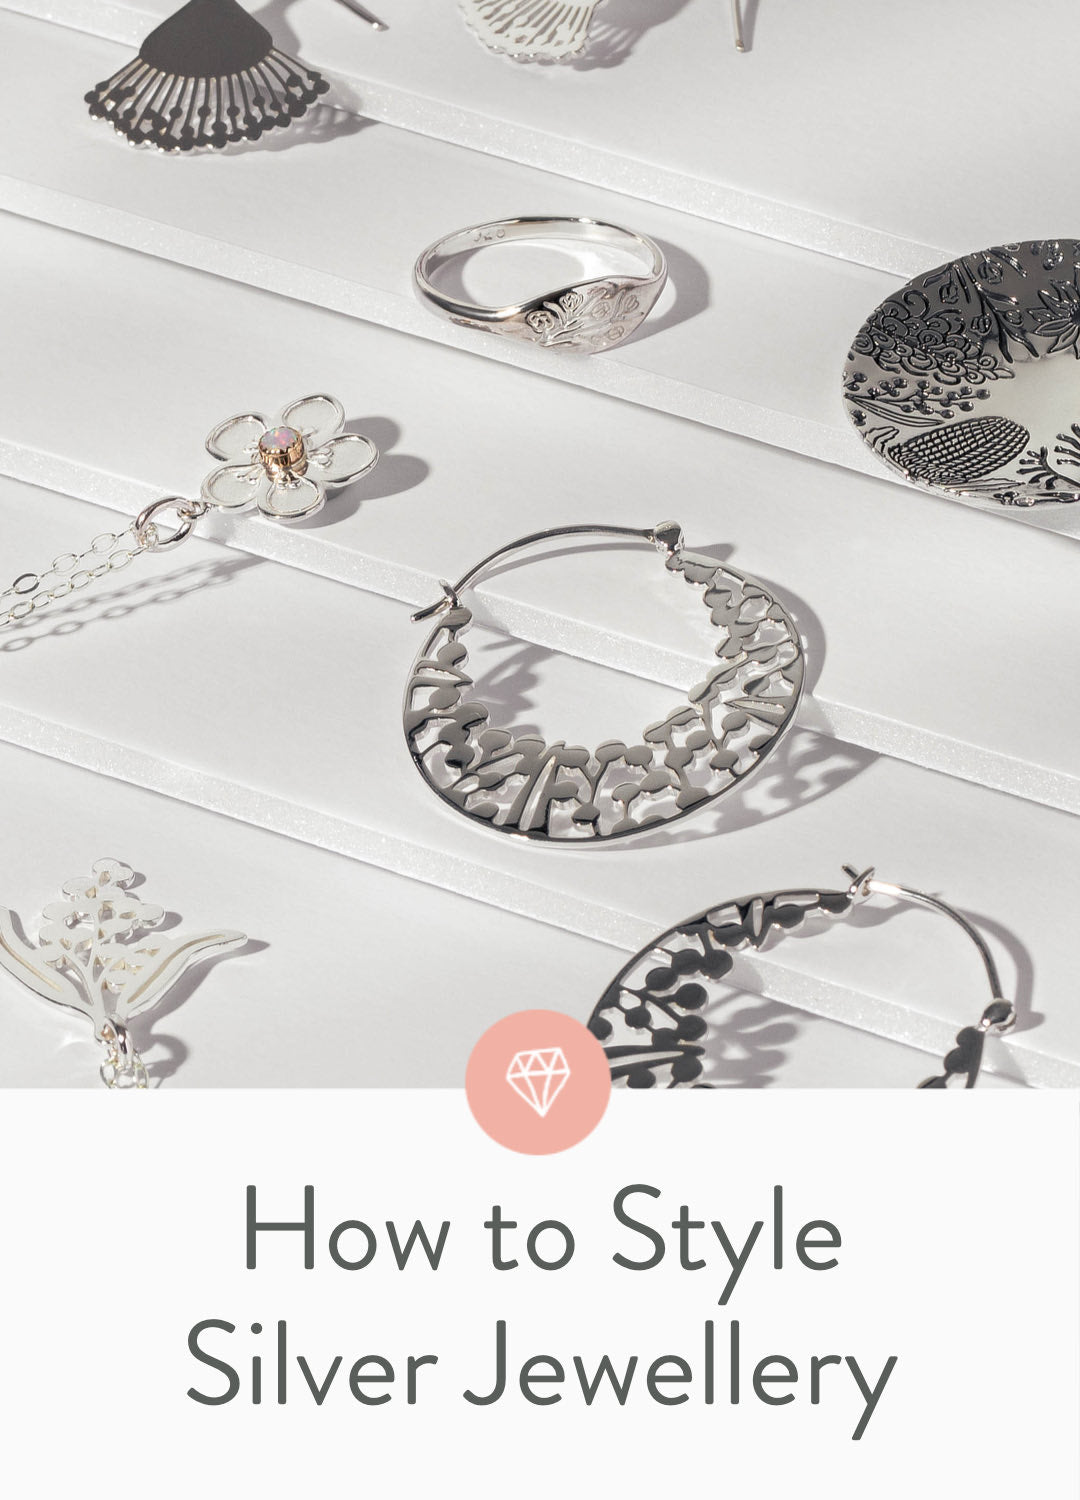 How to style silver jewelry and accessories